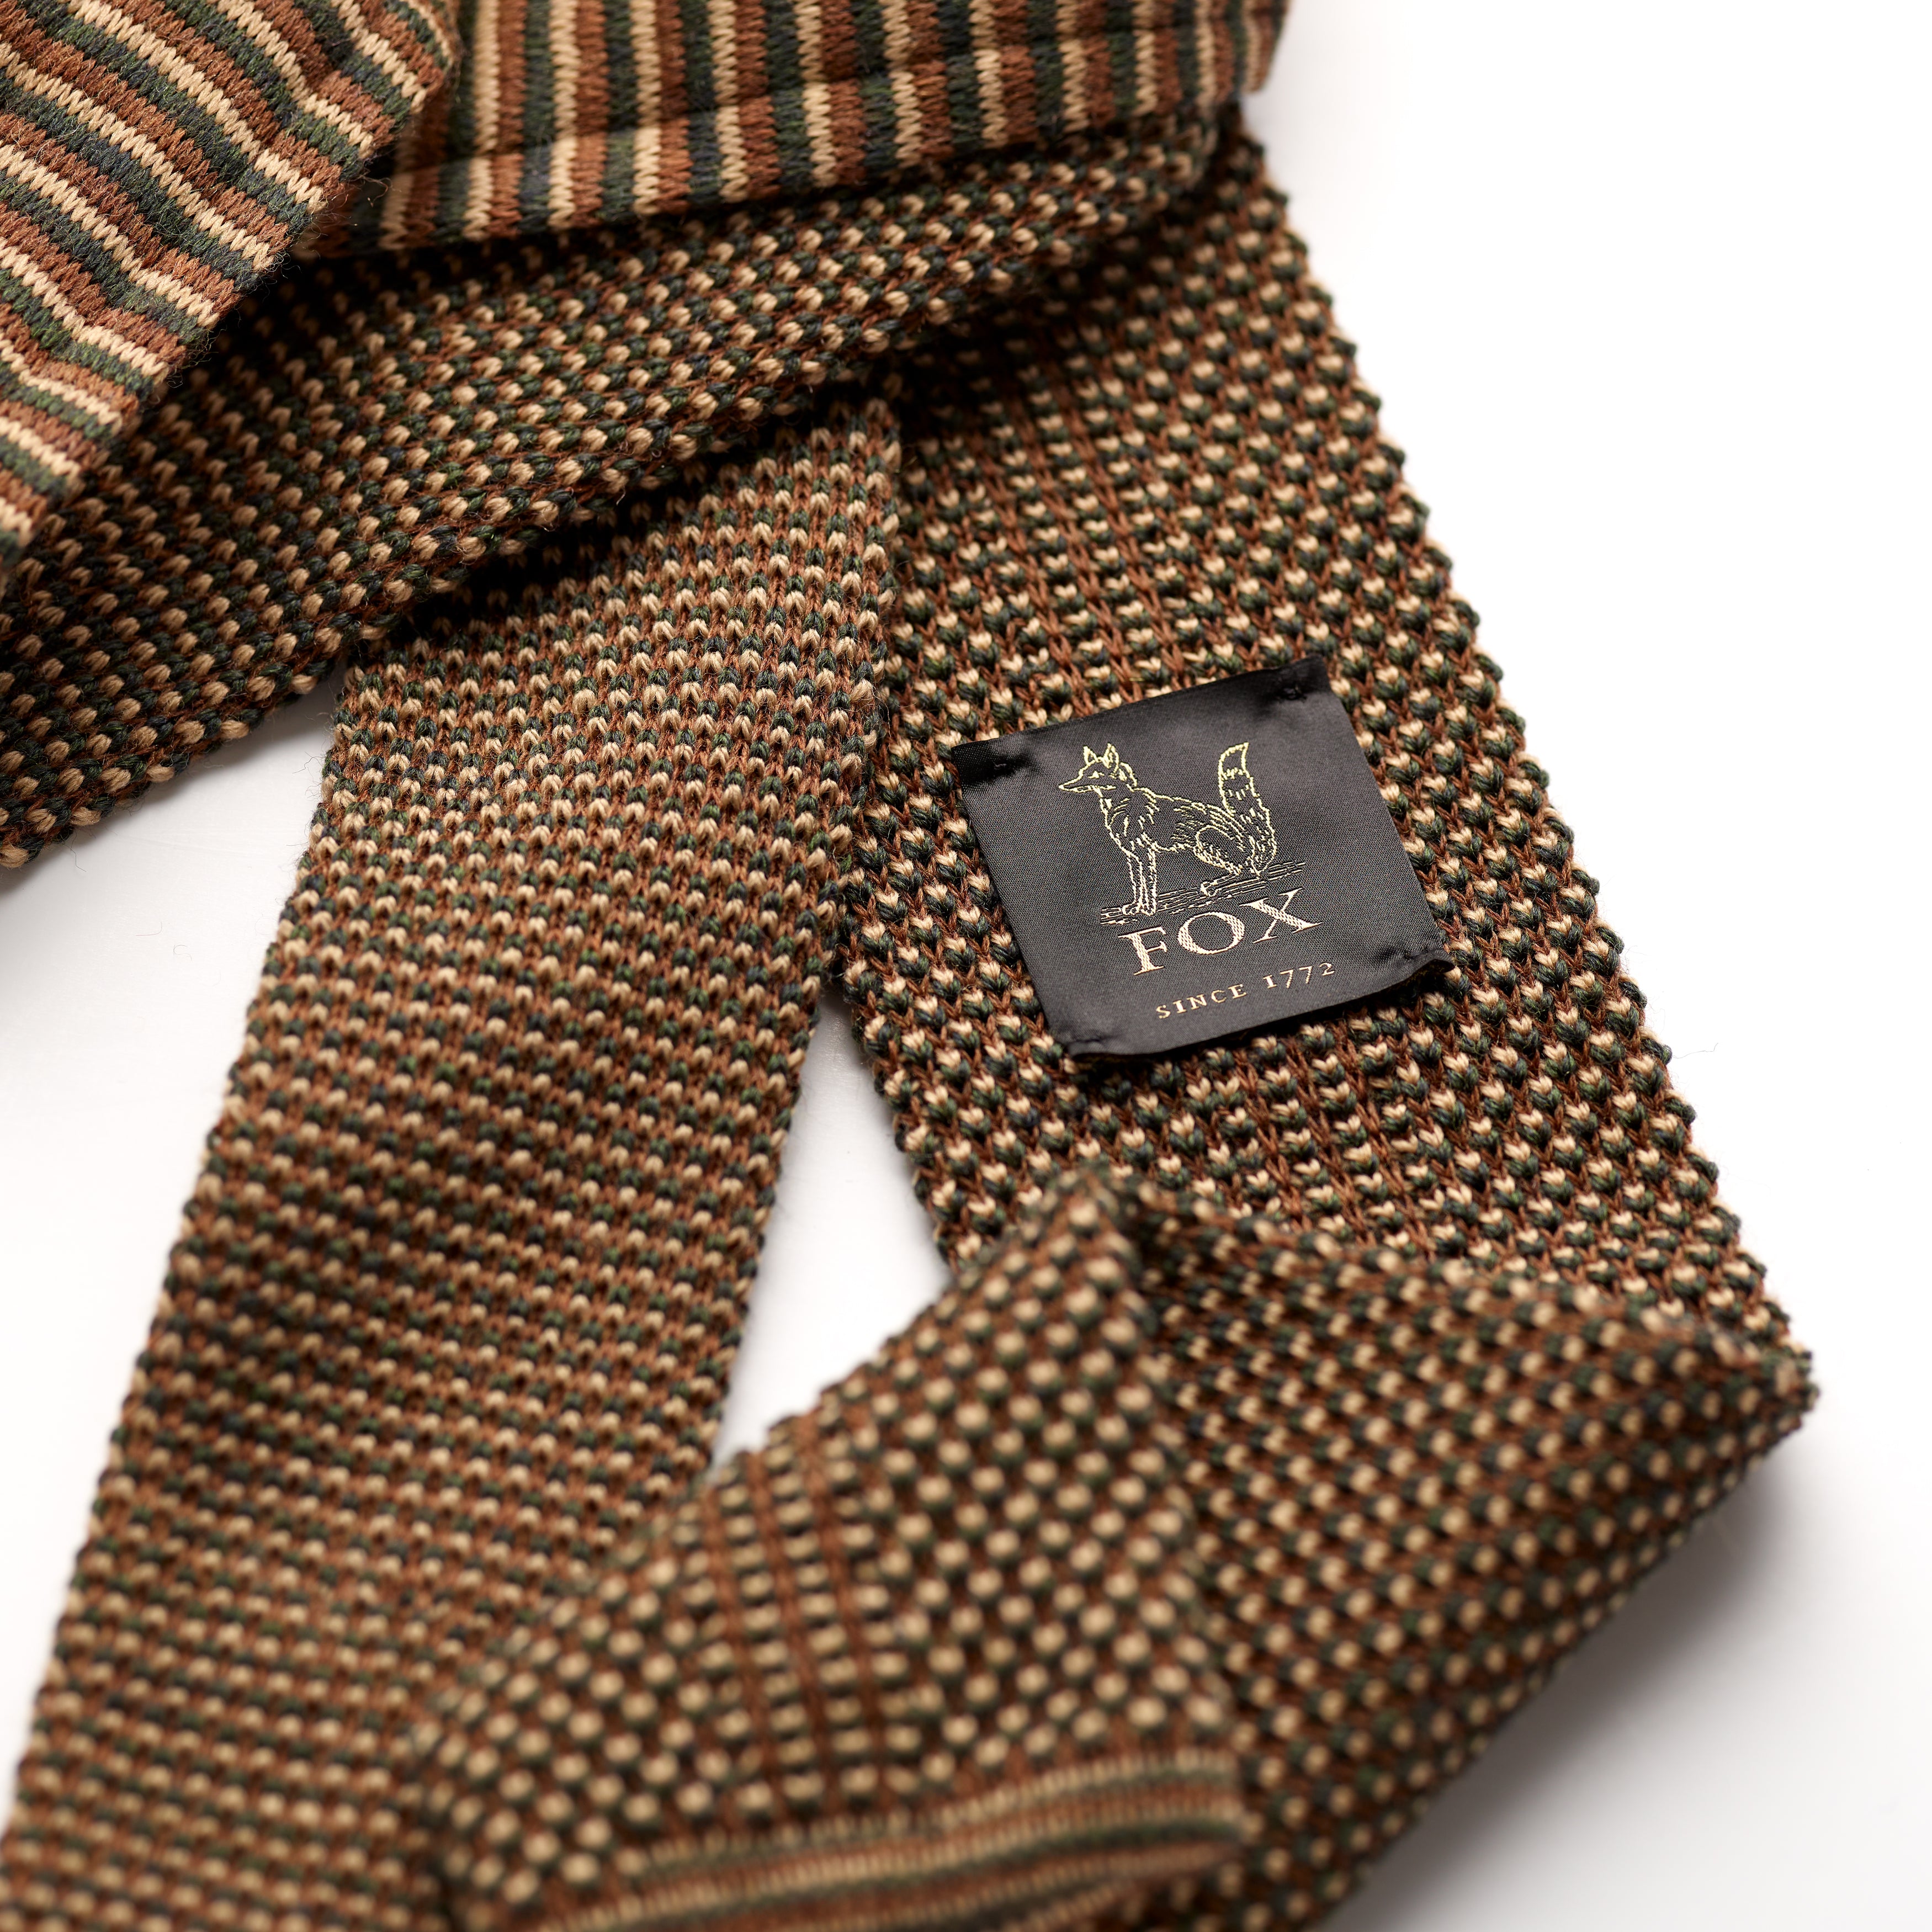 Mushroom, Cappuccino and Khaki Green Spot Wool Knitted Tie Label